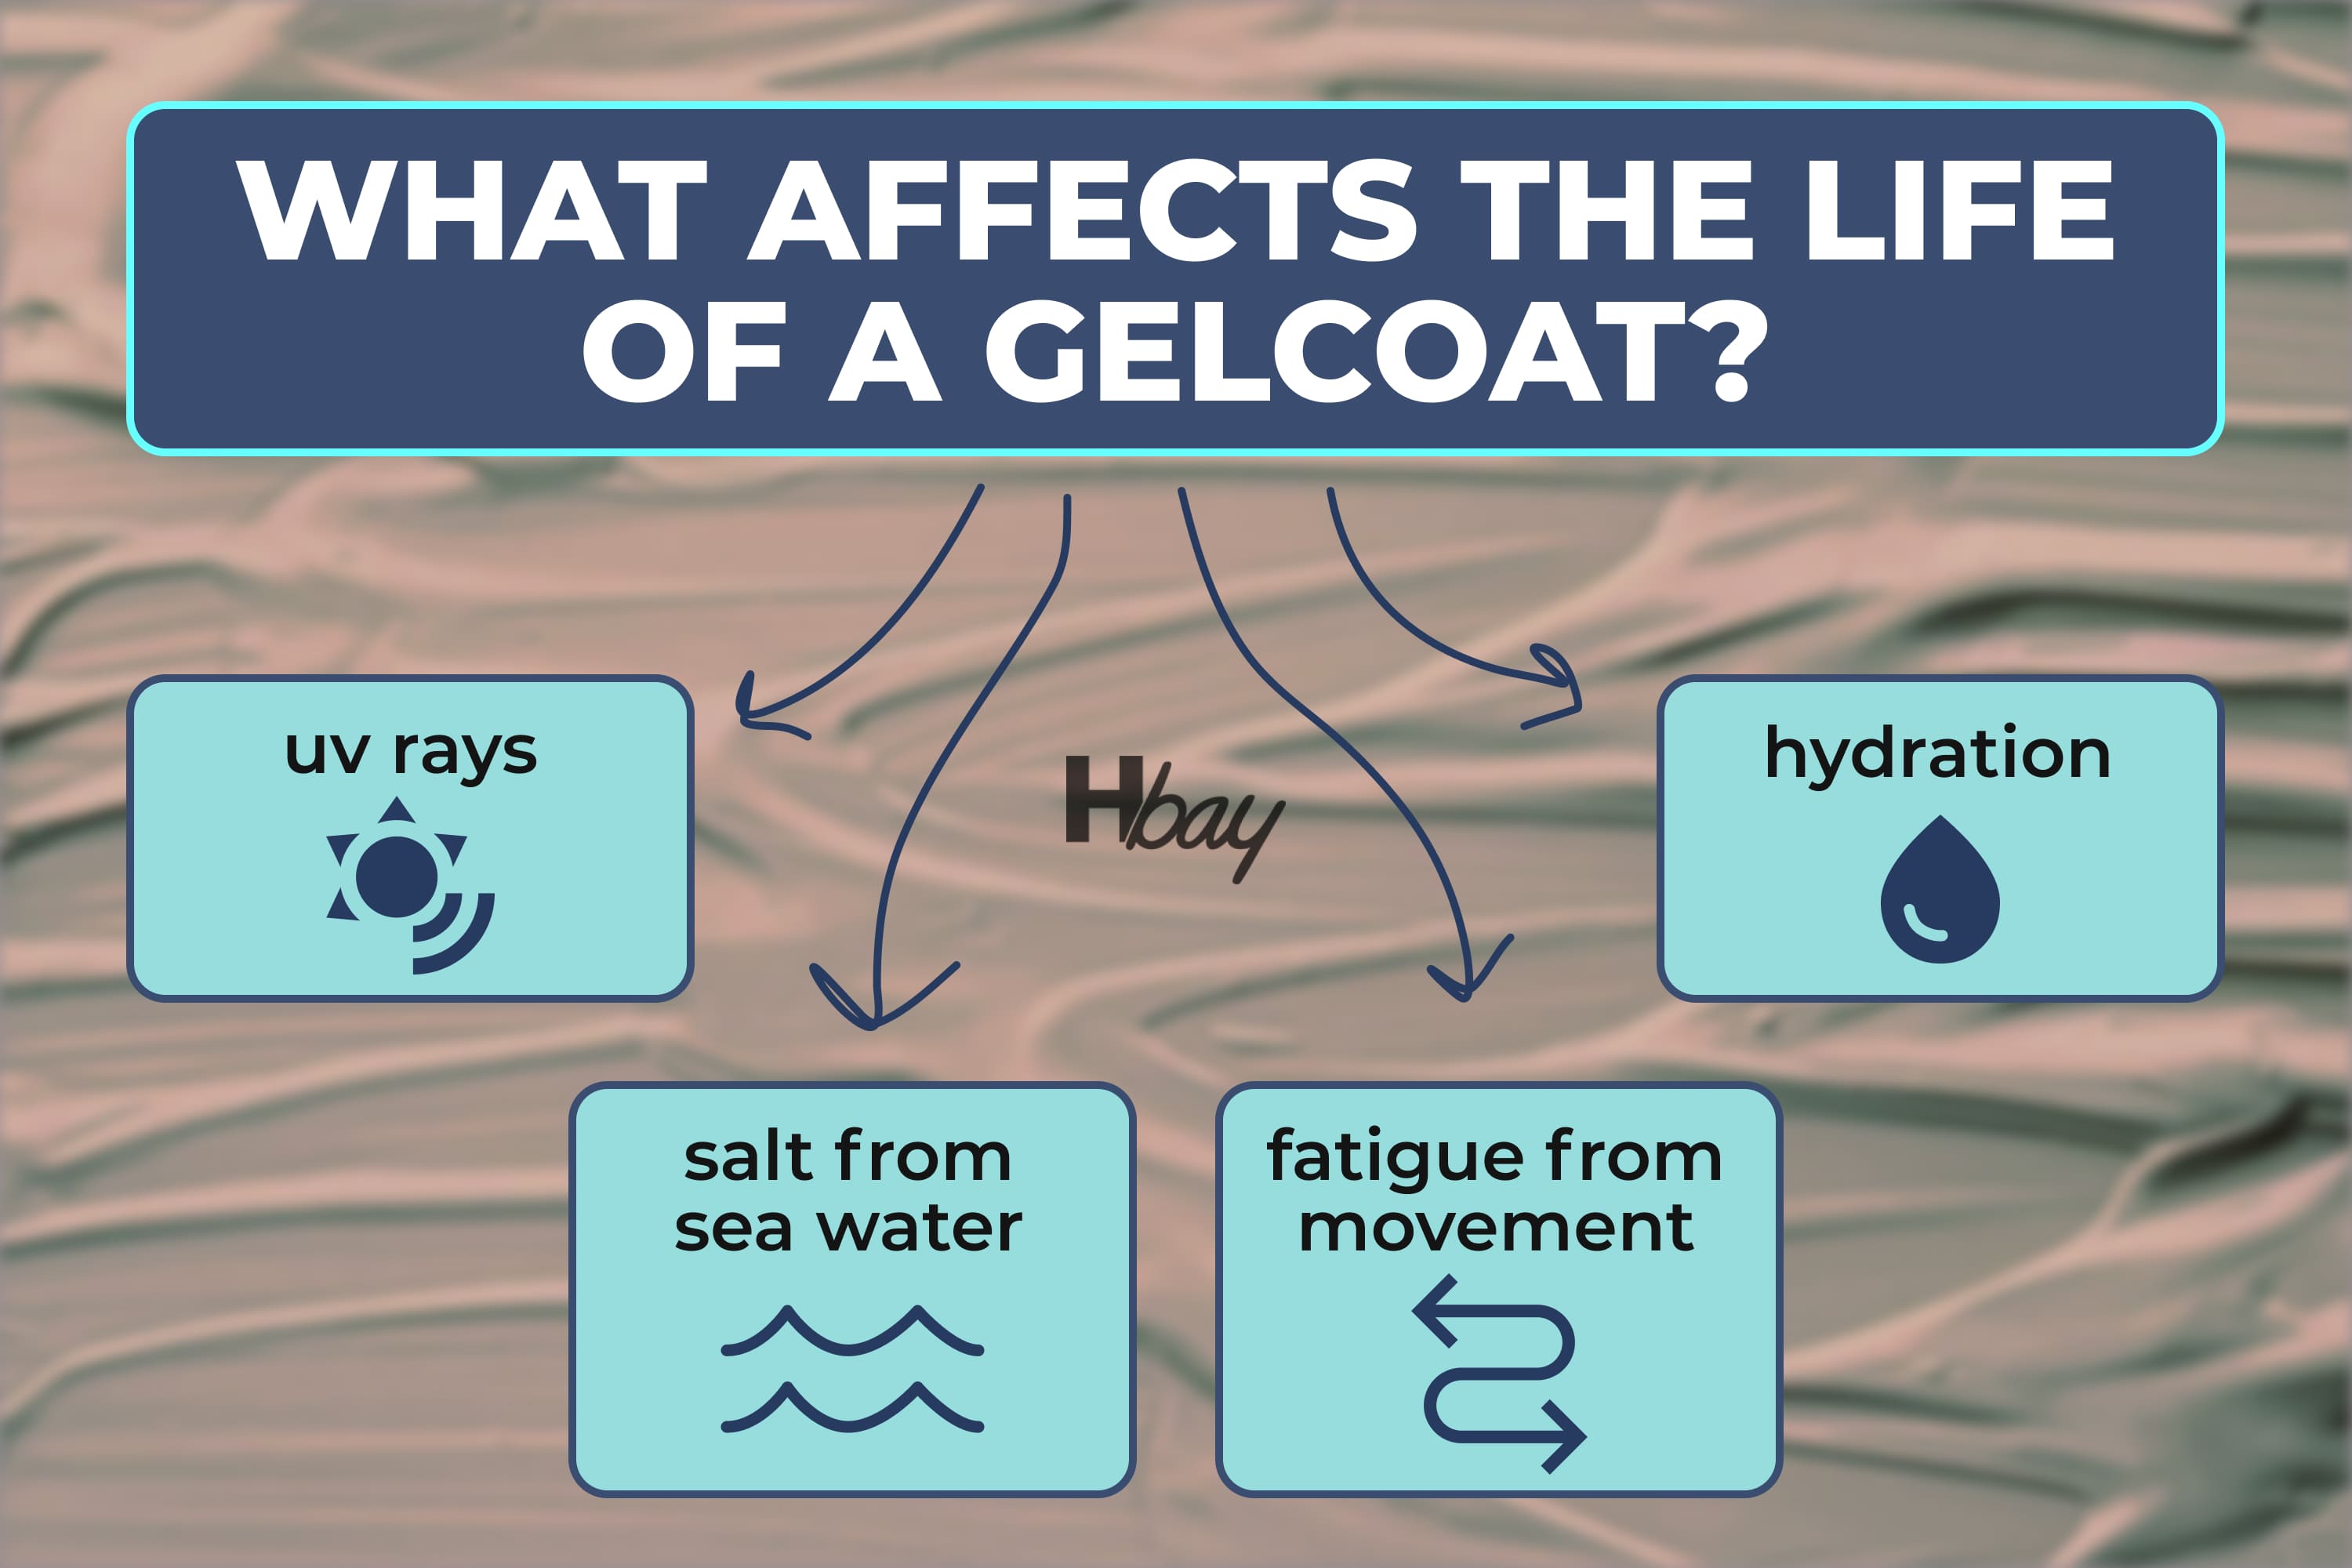 What affects the life of a gelcoat